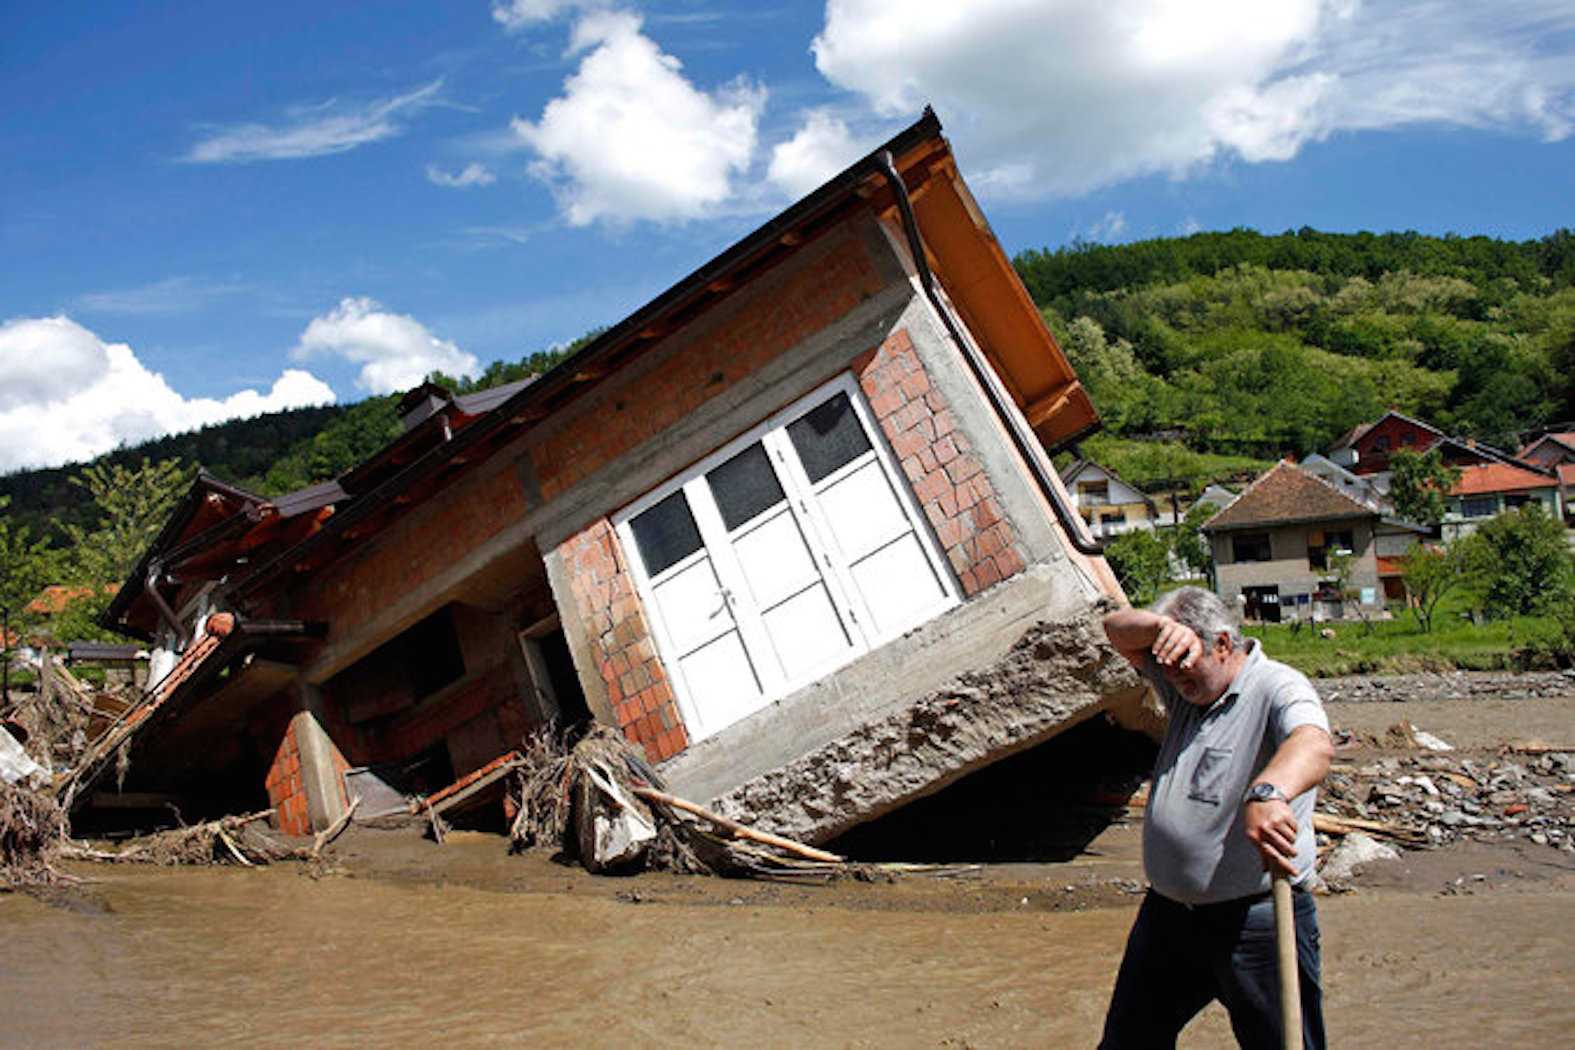 Over 1 Million Affected By Floods in Balkans